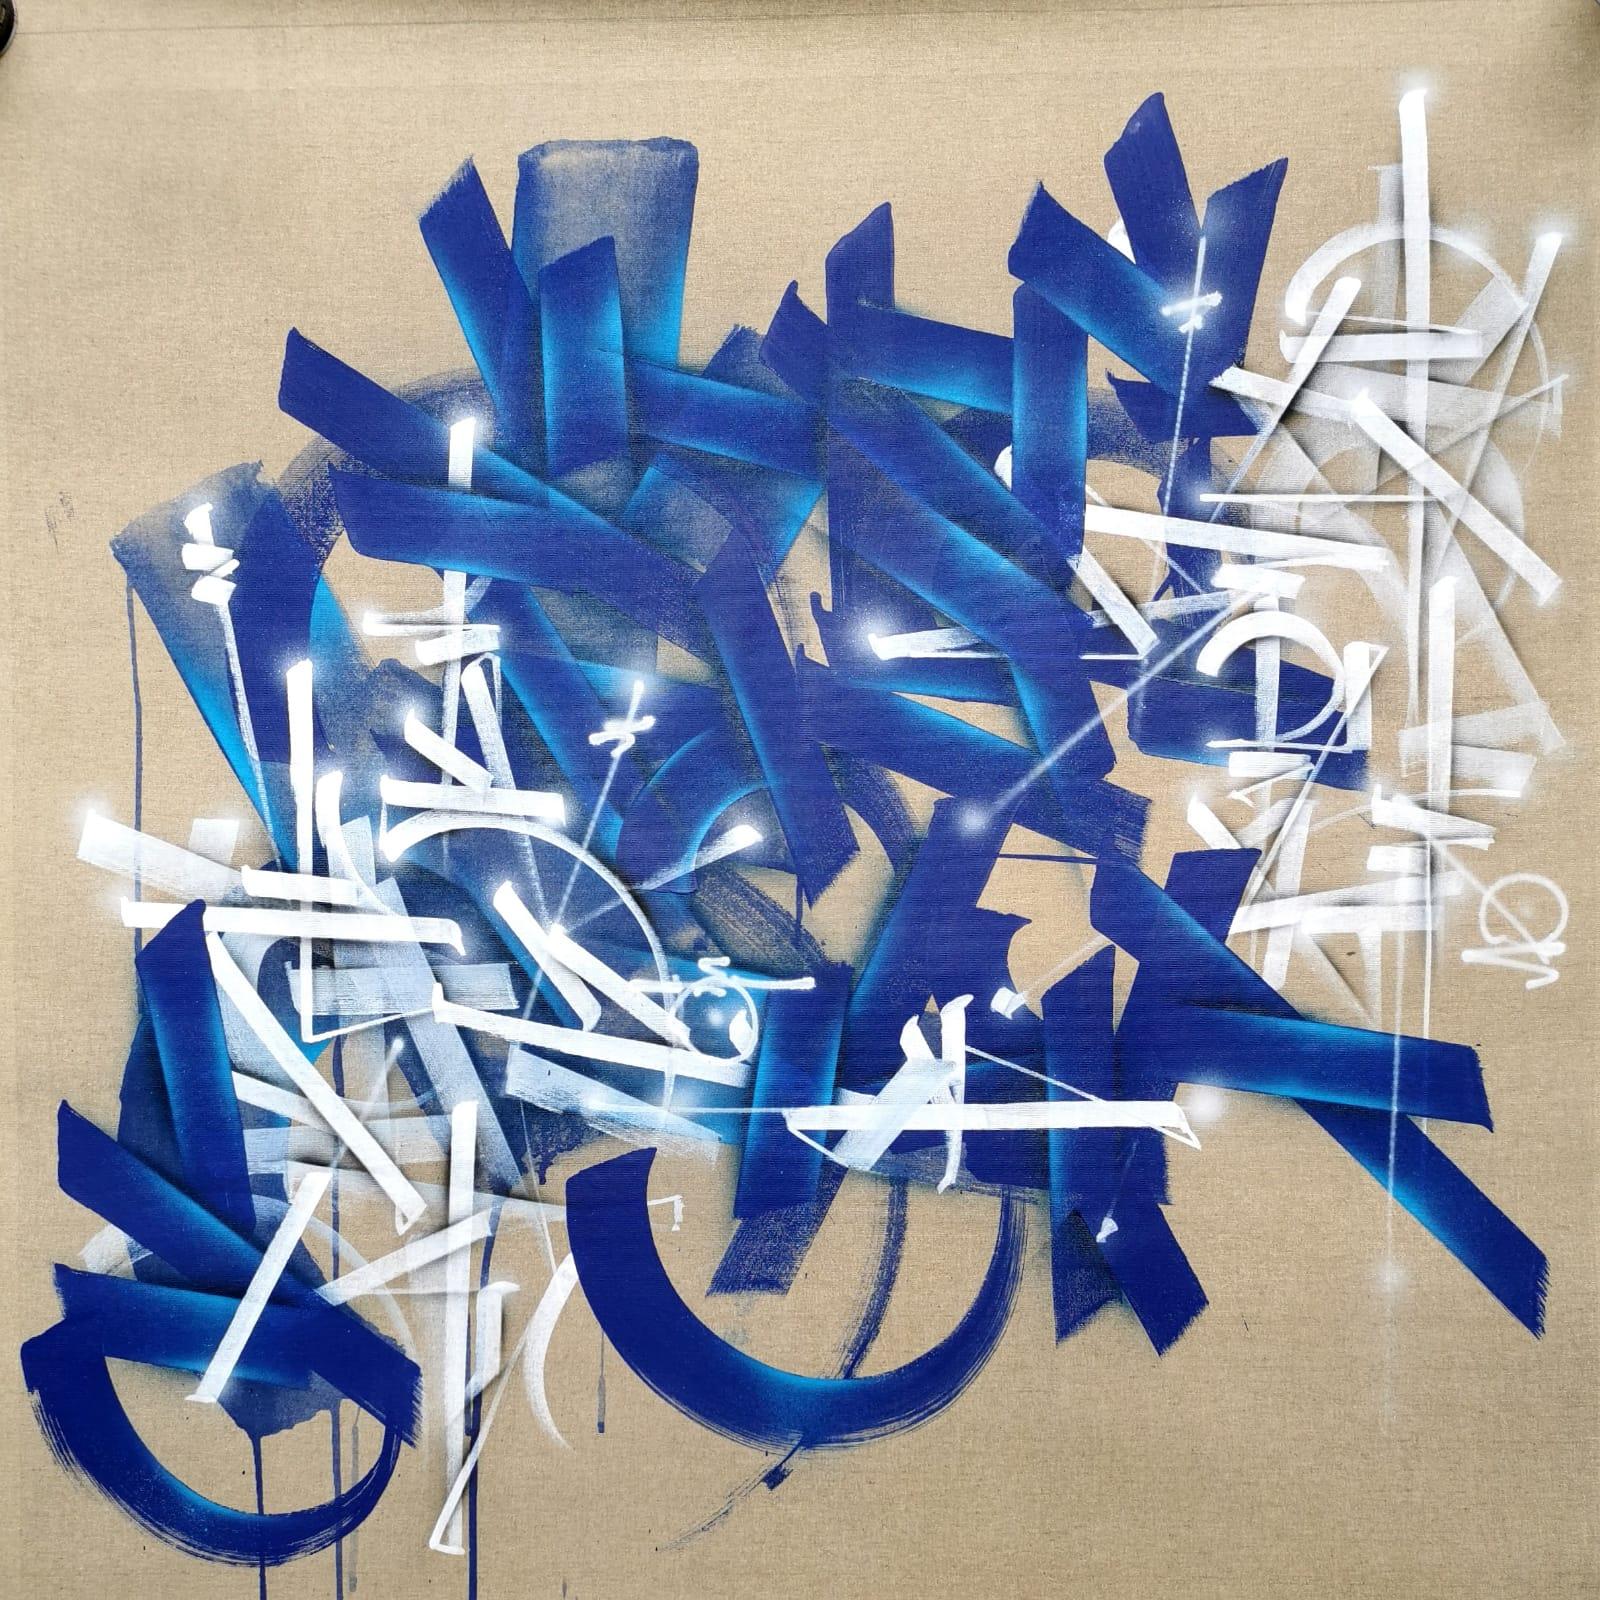 DMVT 0105, Abstract and Calligraphic art by French Street Artist SOKLAK For Sale 6